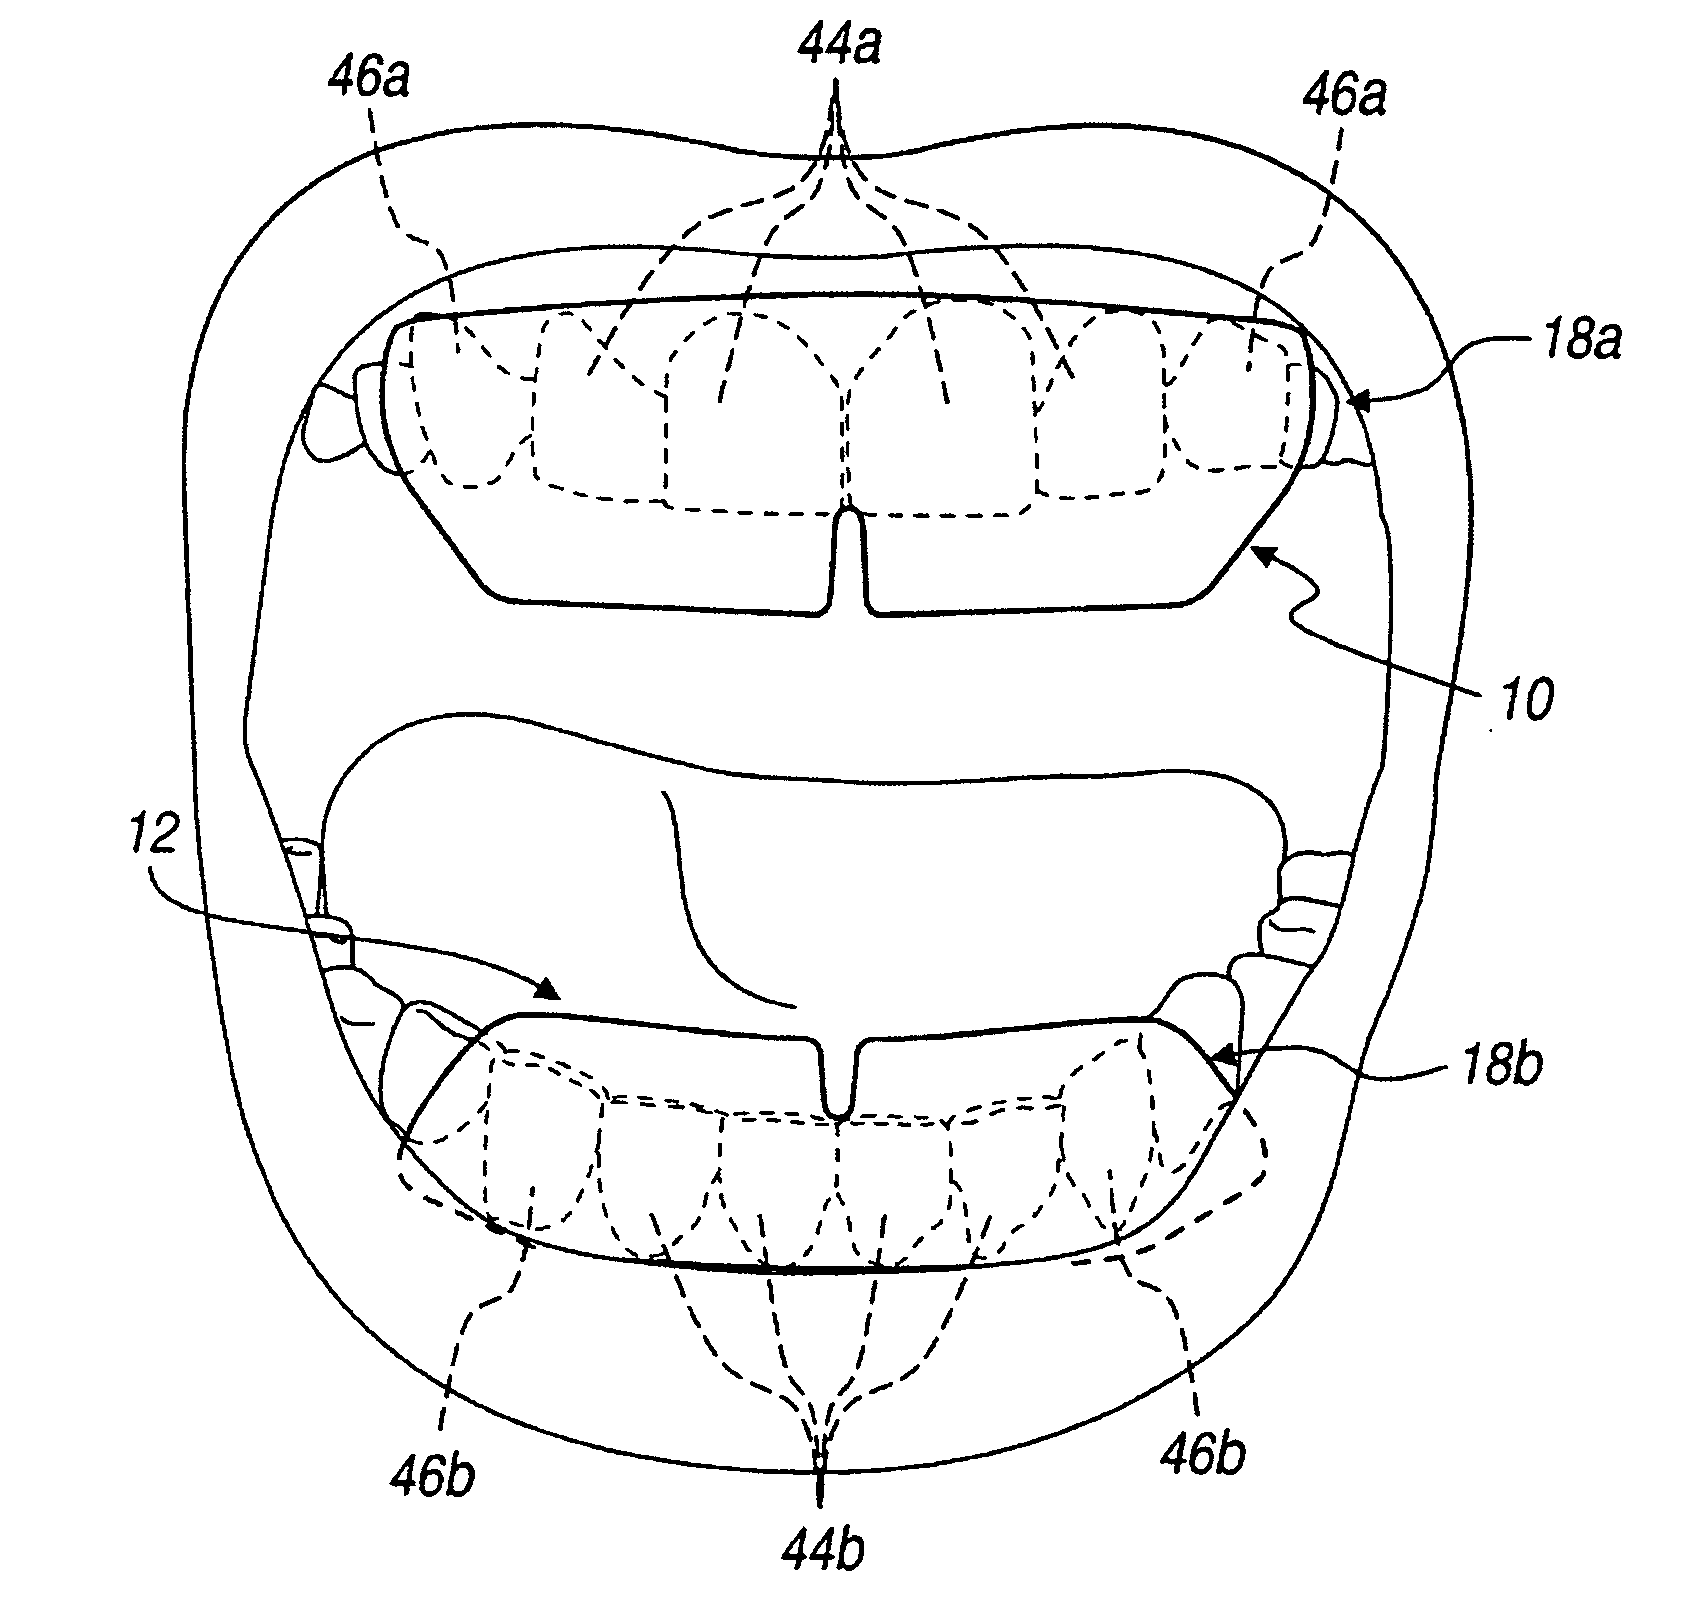 Carrier strip for application to oral surfaces and related methods